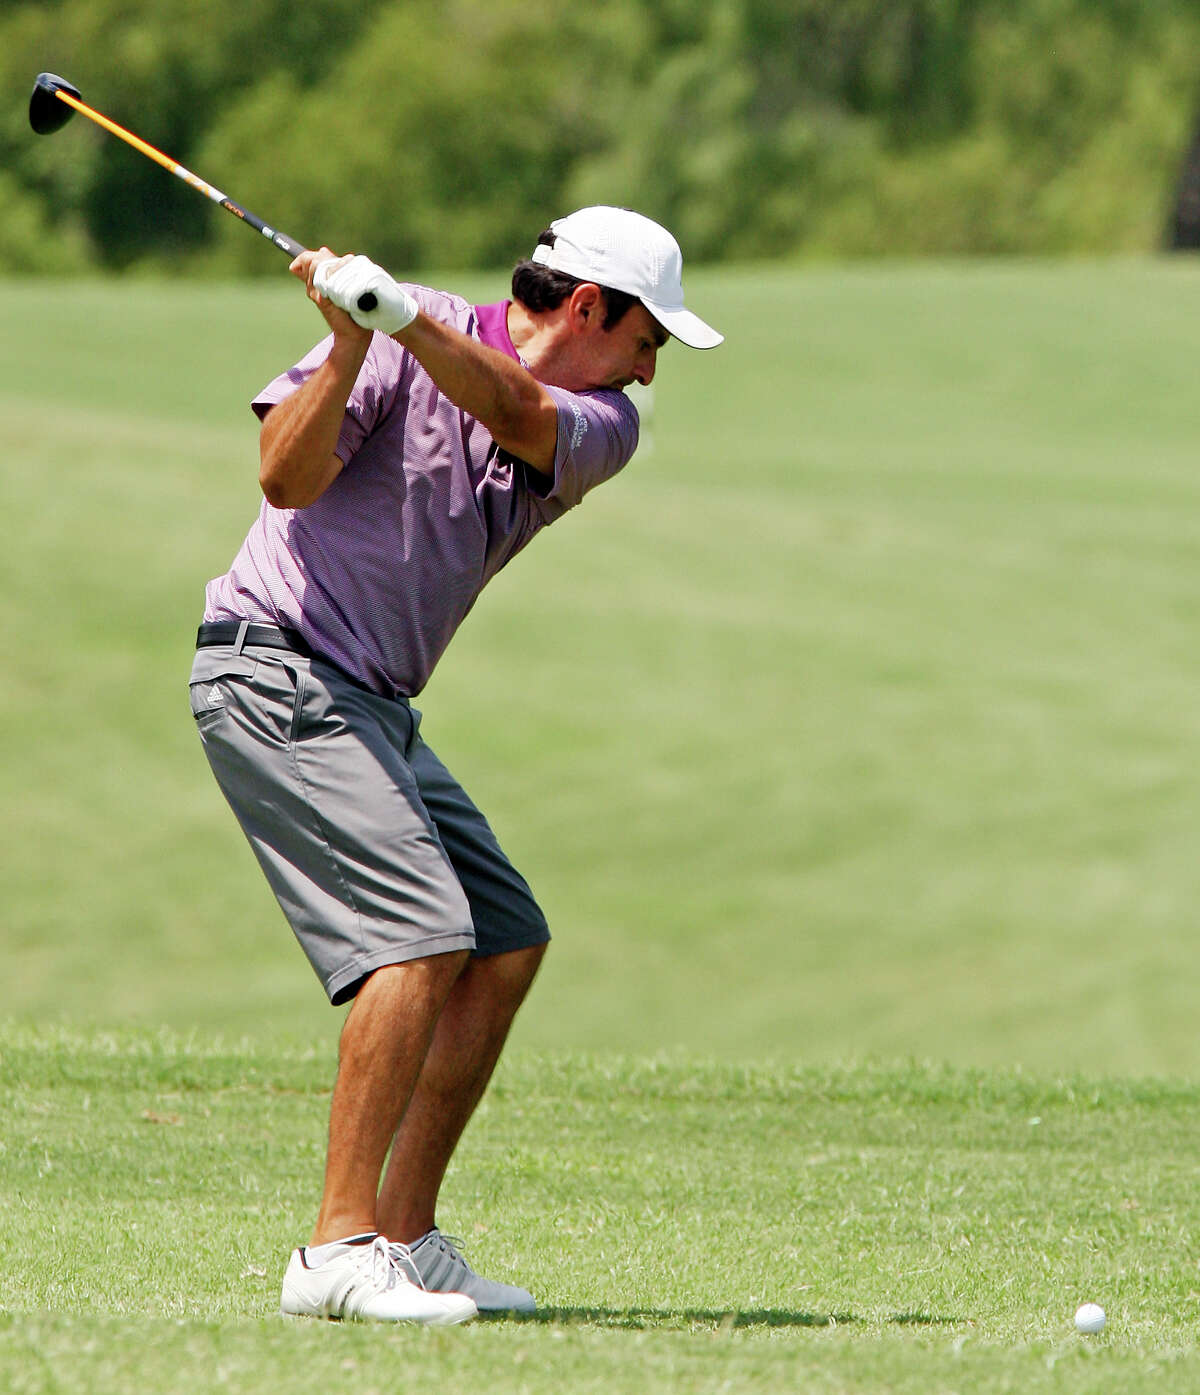 Ed Sanchez tees off on 10 during the Greater San Antonio Match Play Championship finals Sunday July 15, 2012 at Willow Springs Golf Course. Sanchez defeated Gordy McKeown to win the men's division.